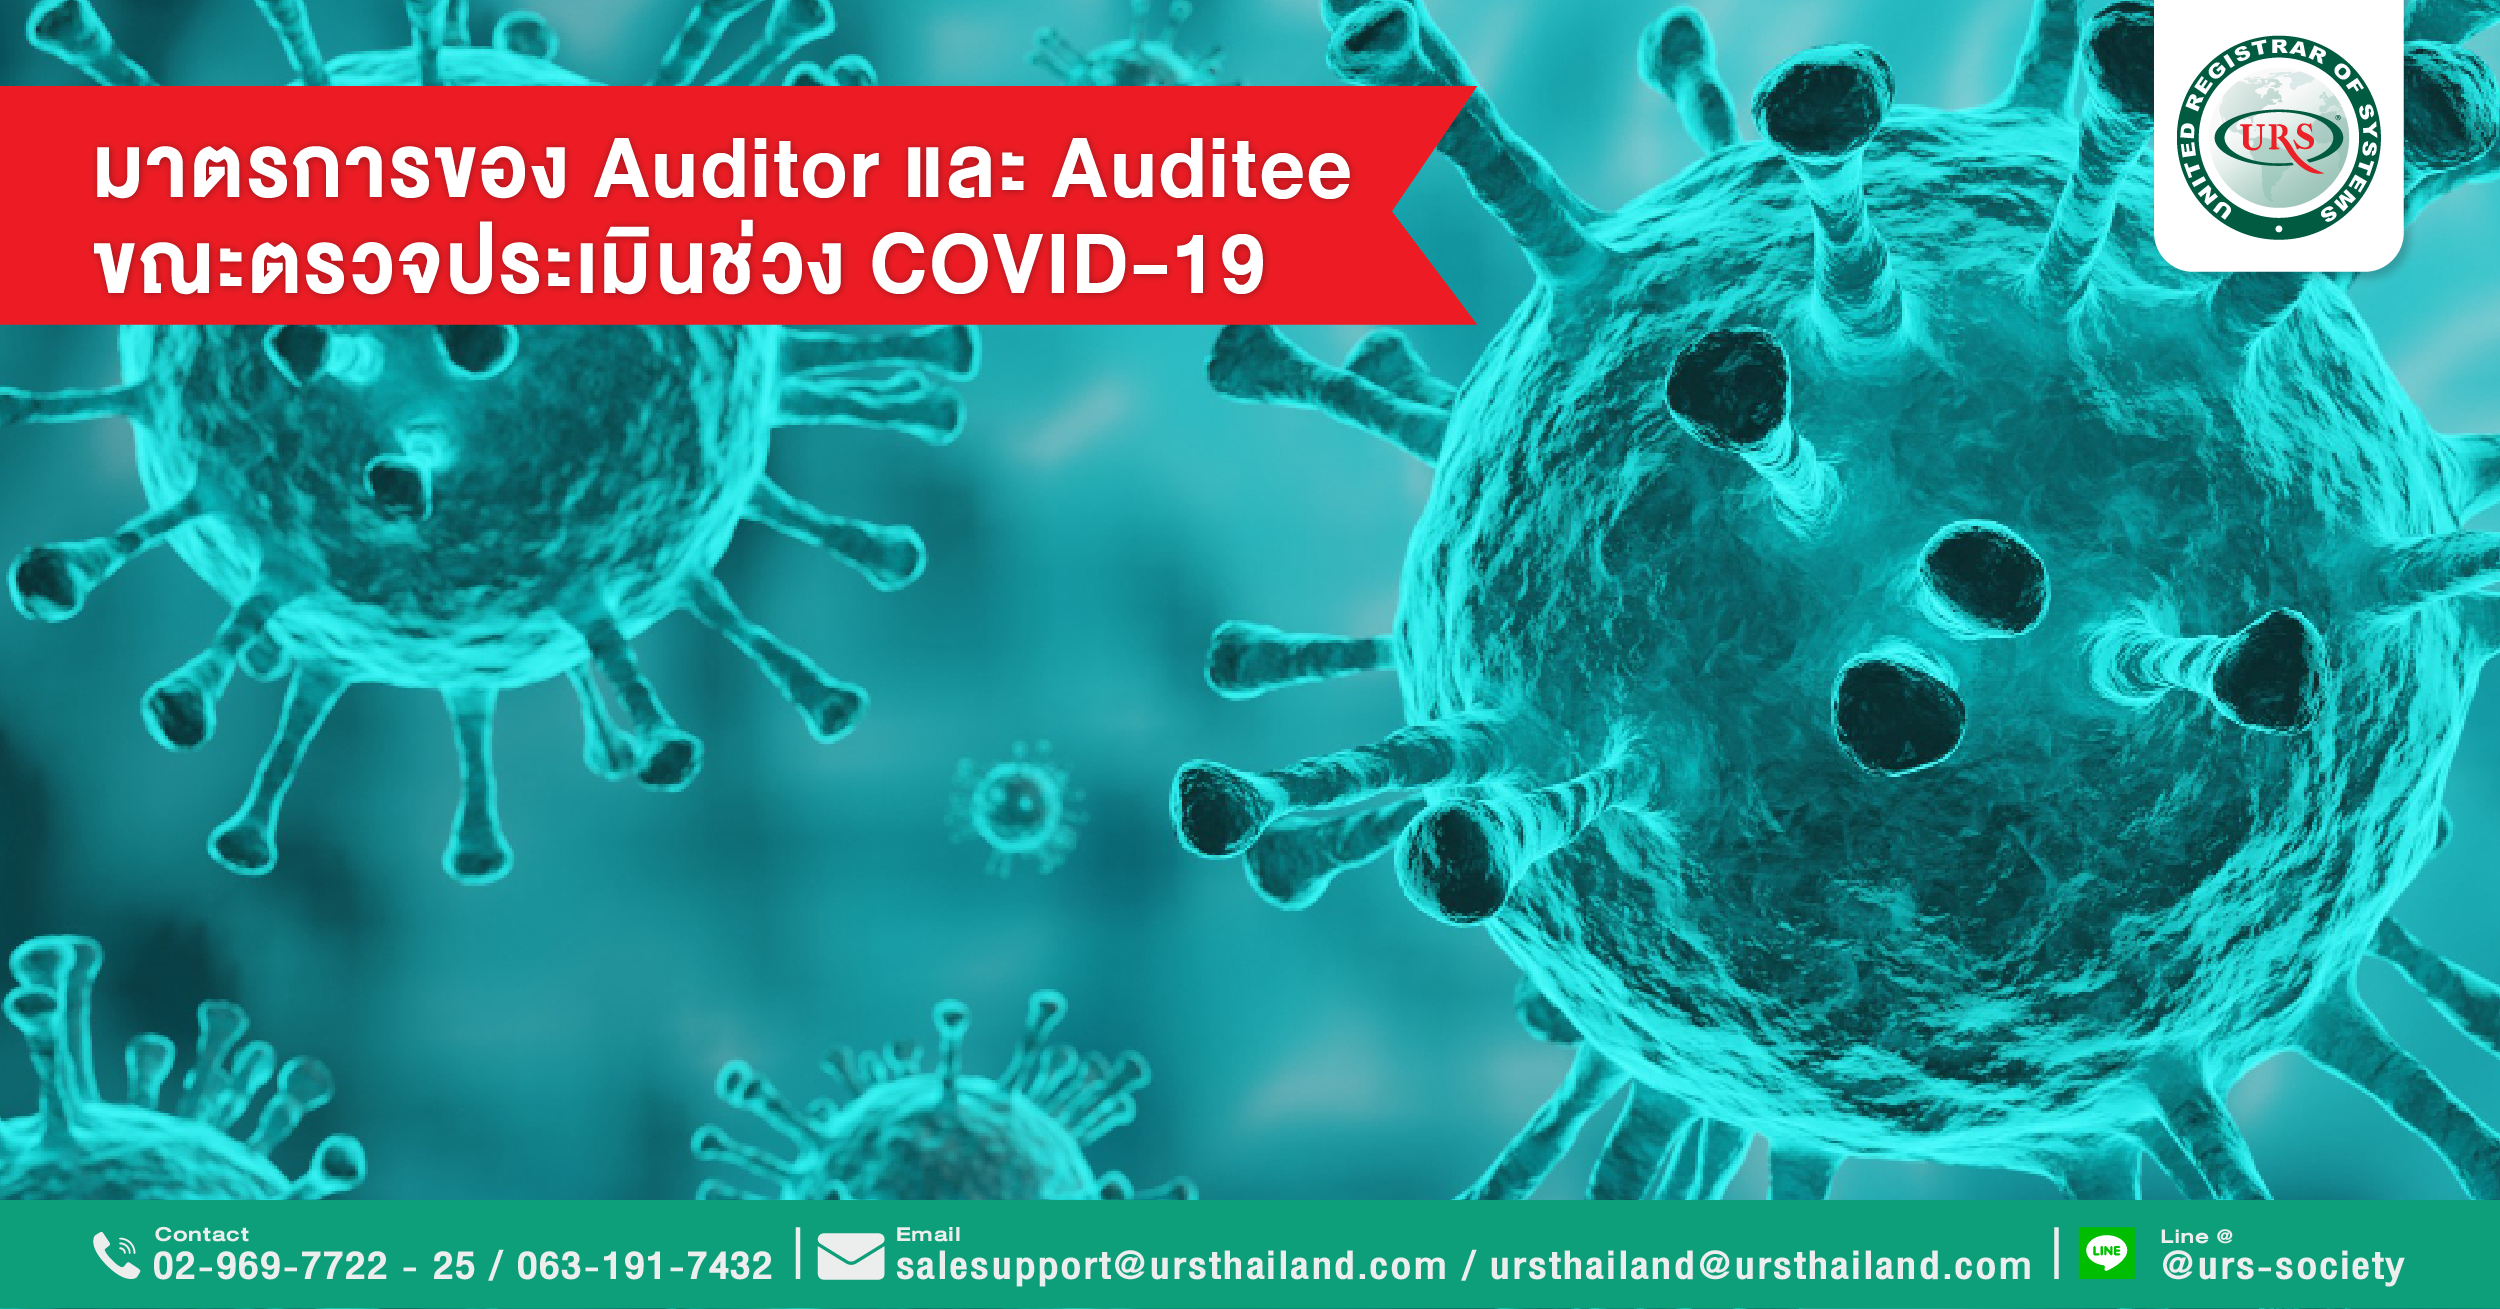 05_Measures of the Auditor and Auditee while inspecting during COVID-19-01